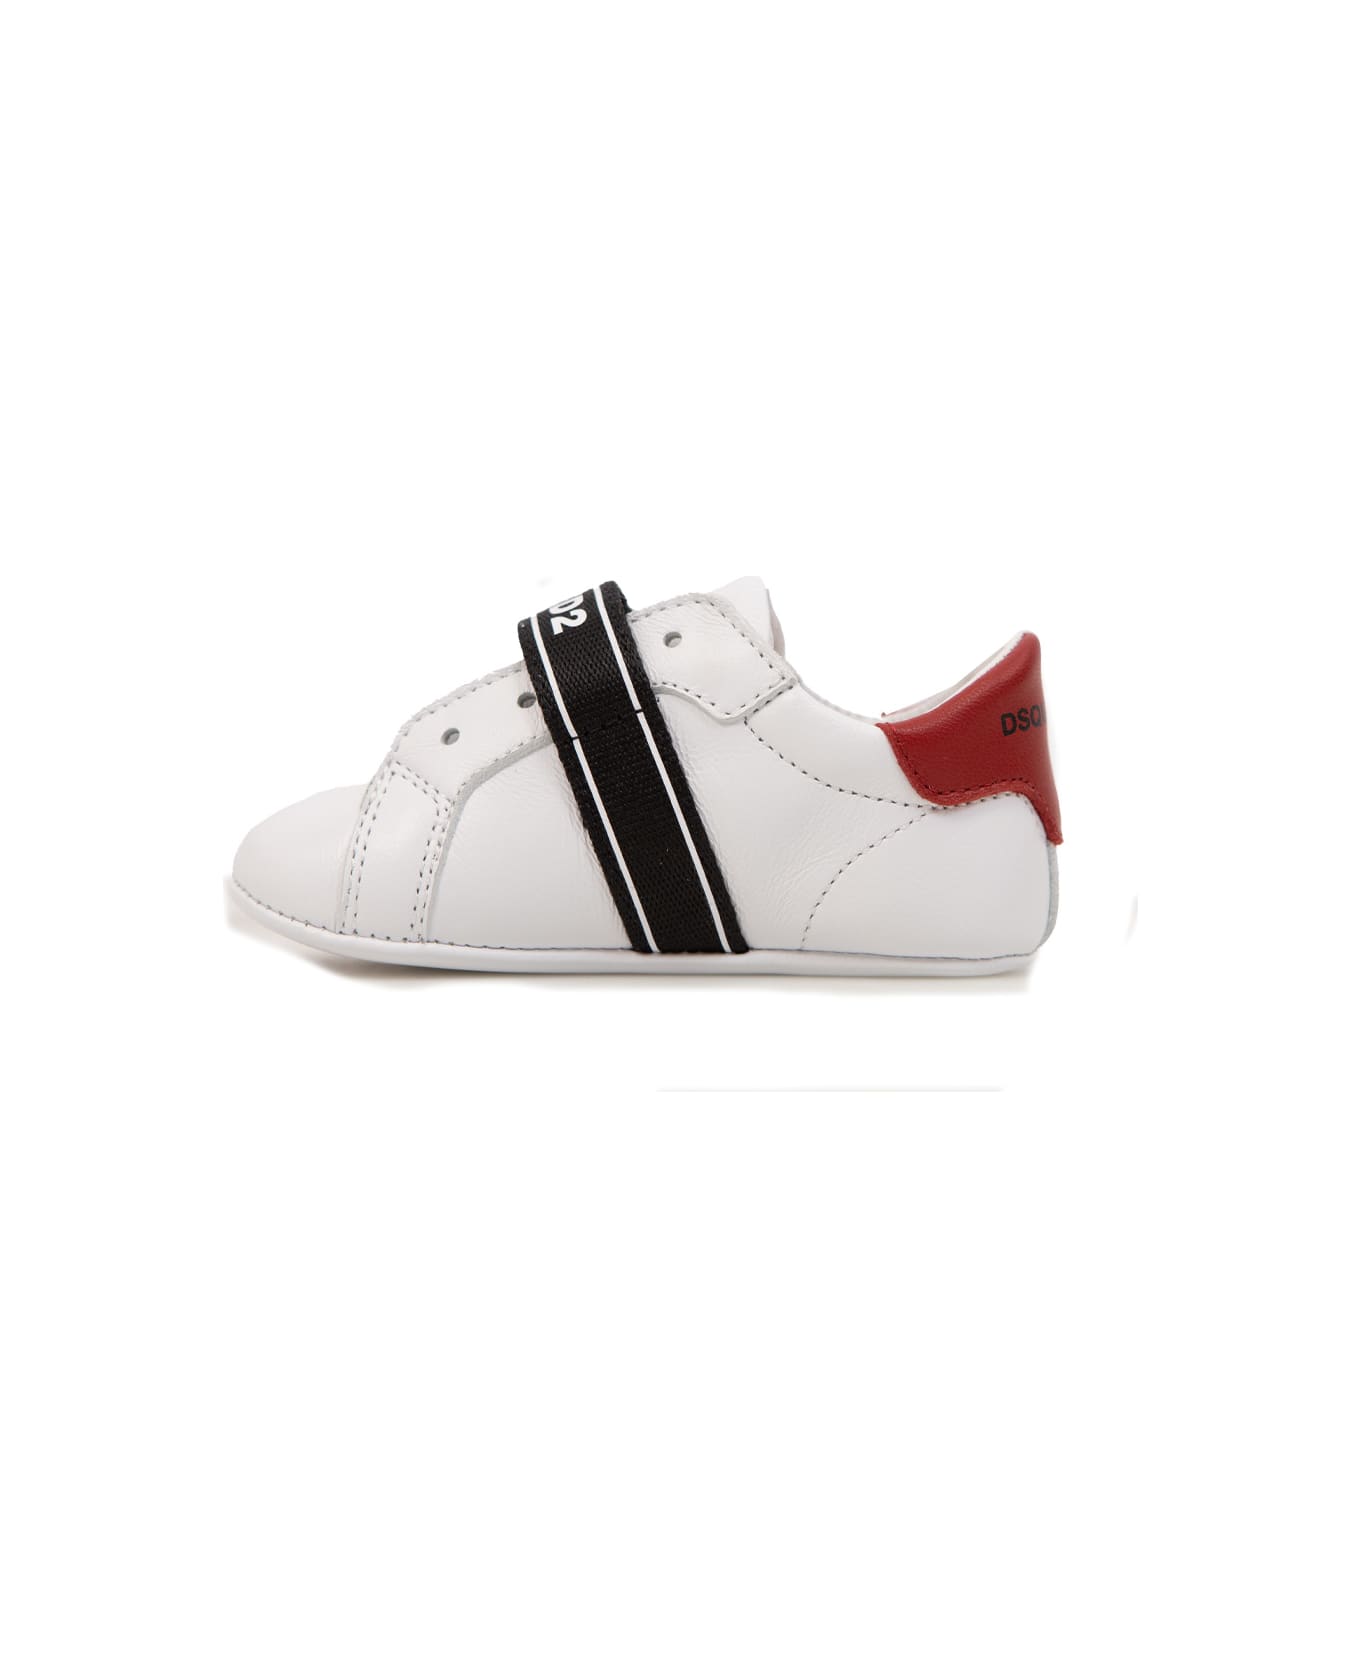 Dsquared2 First Steps Shoes - White シューズ